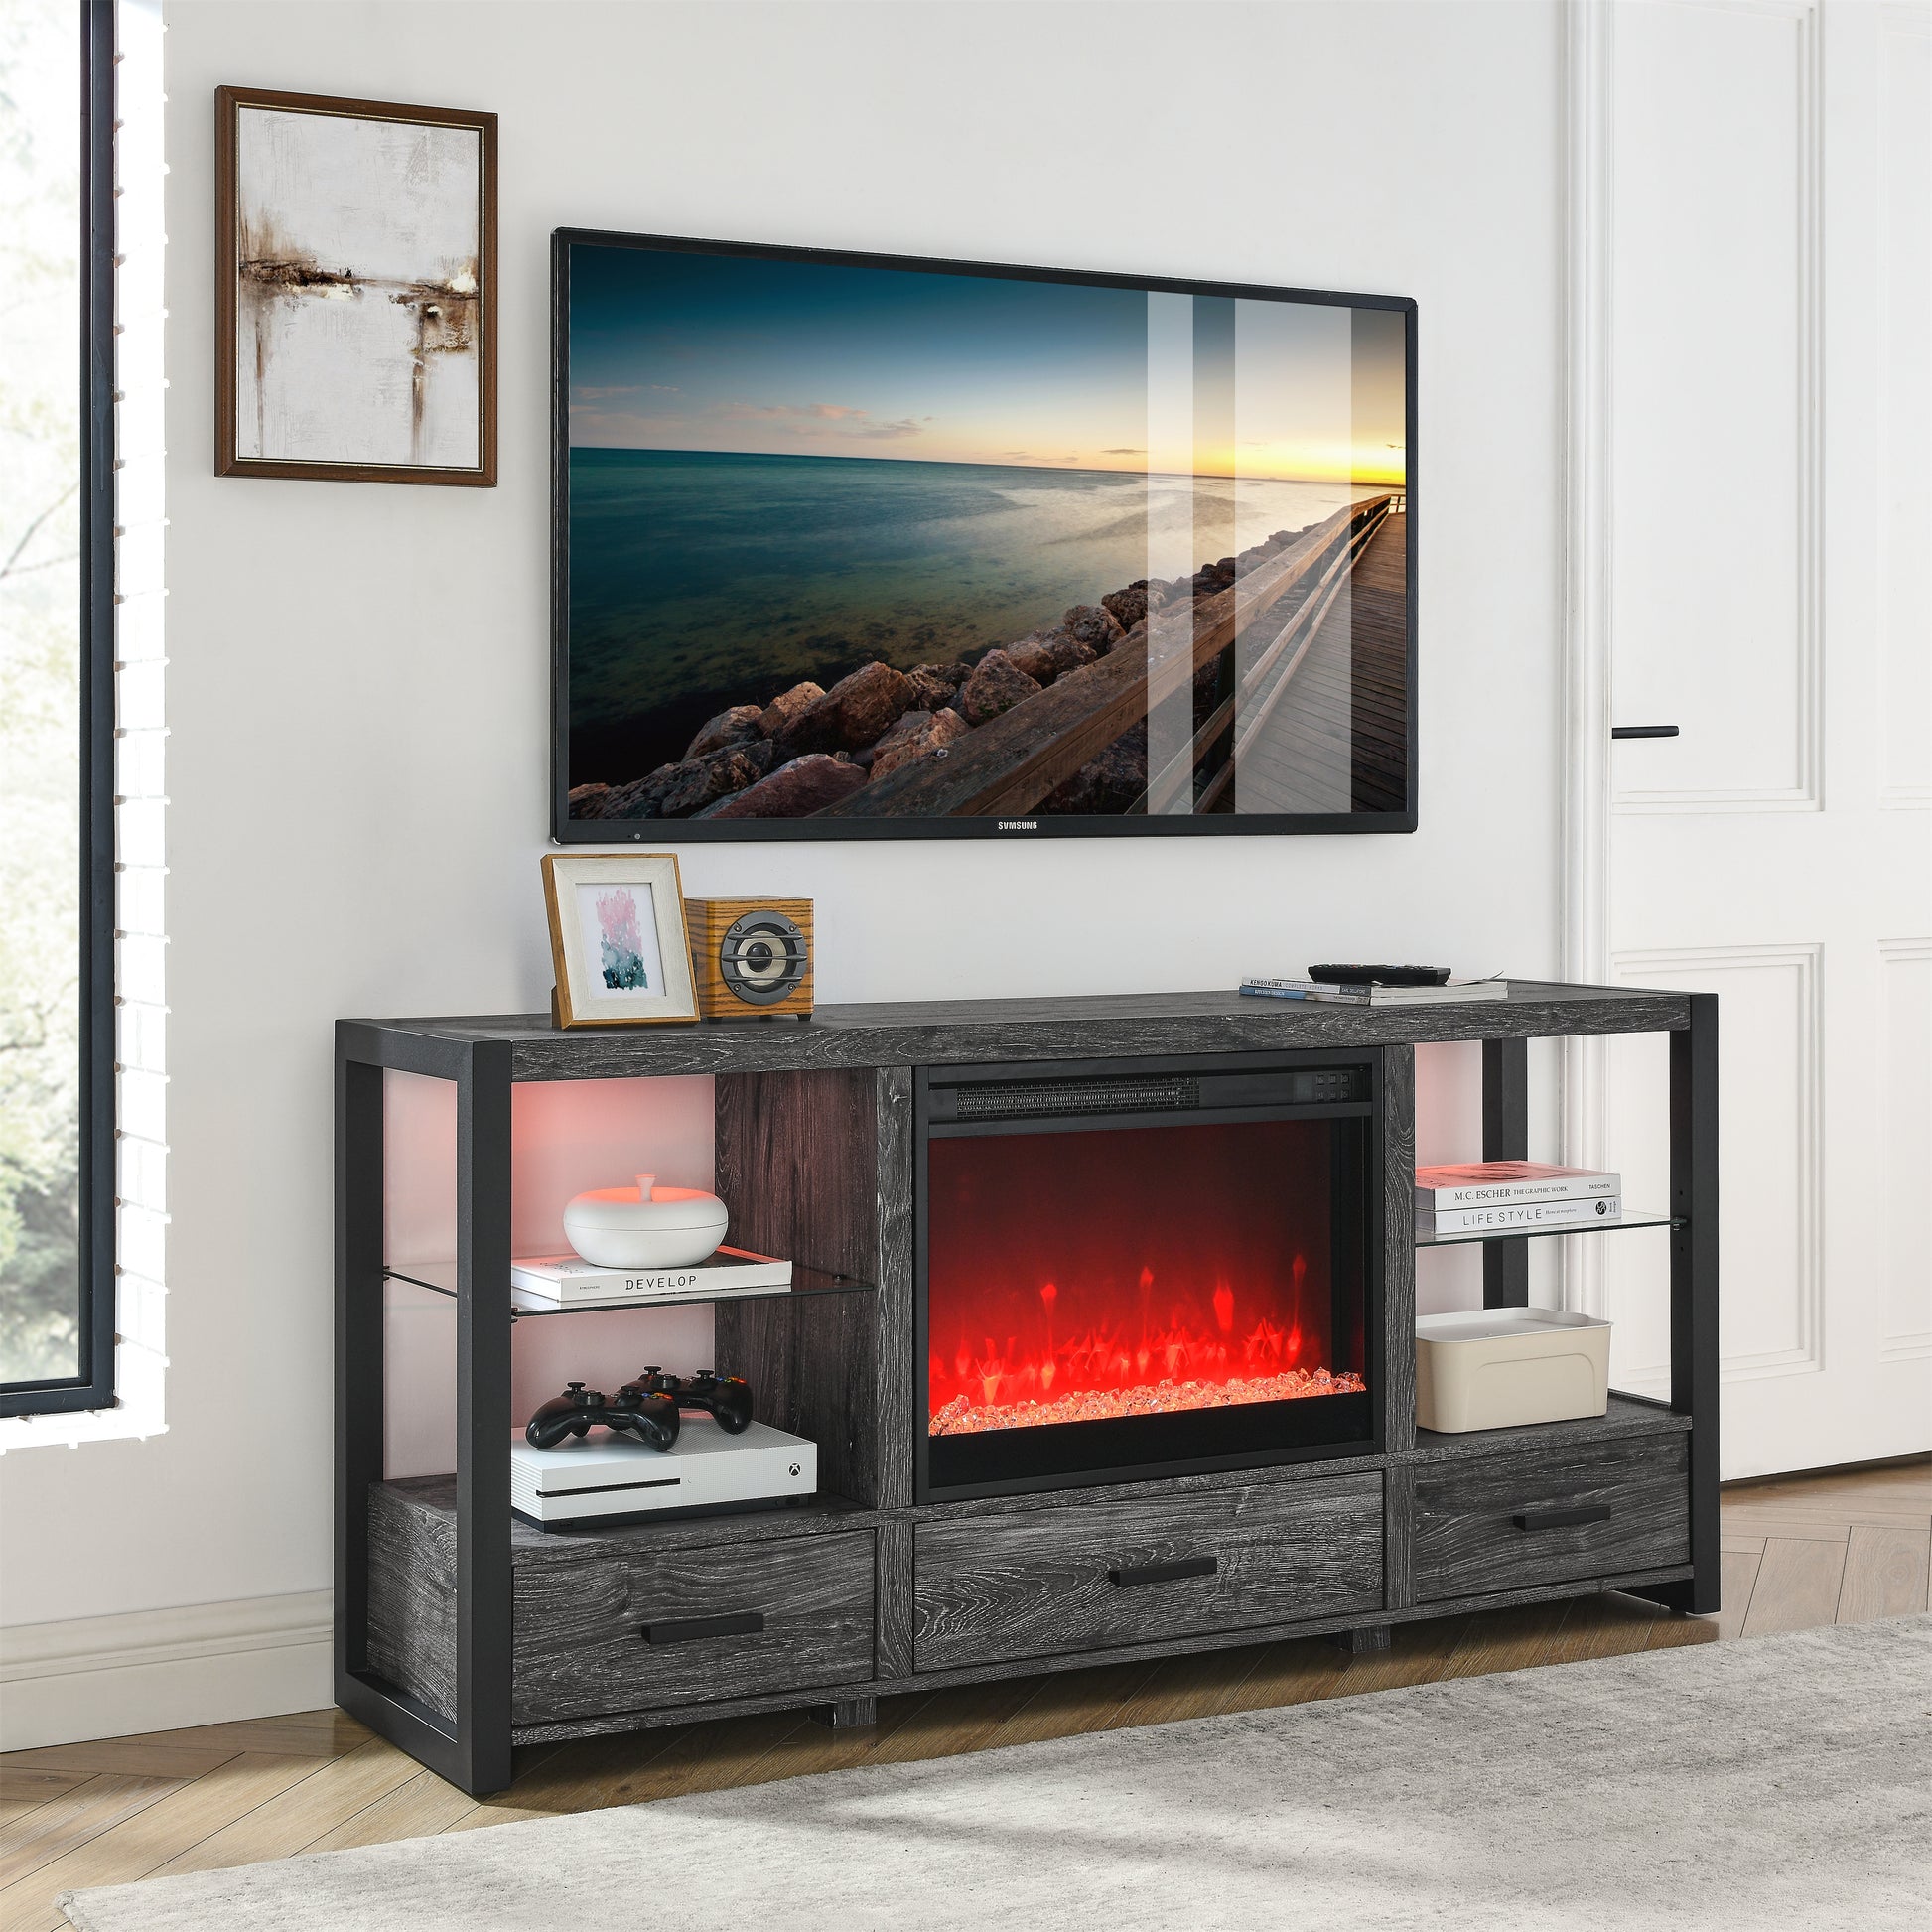 60 Inch Electric Fireplace Media TV Stand With Sync Colorful LED Lights-Dark rustic oak color - Enova Luxe Home Store